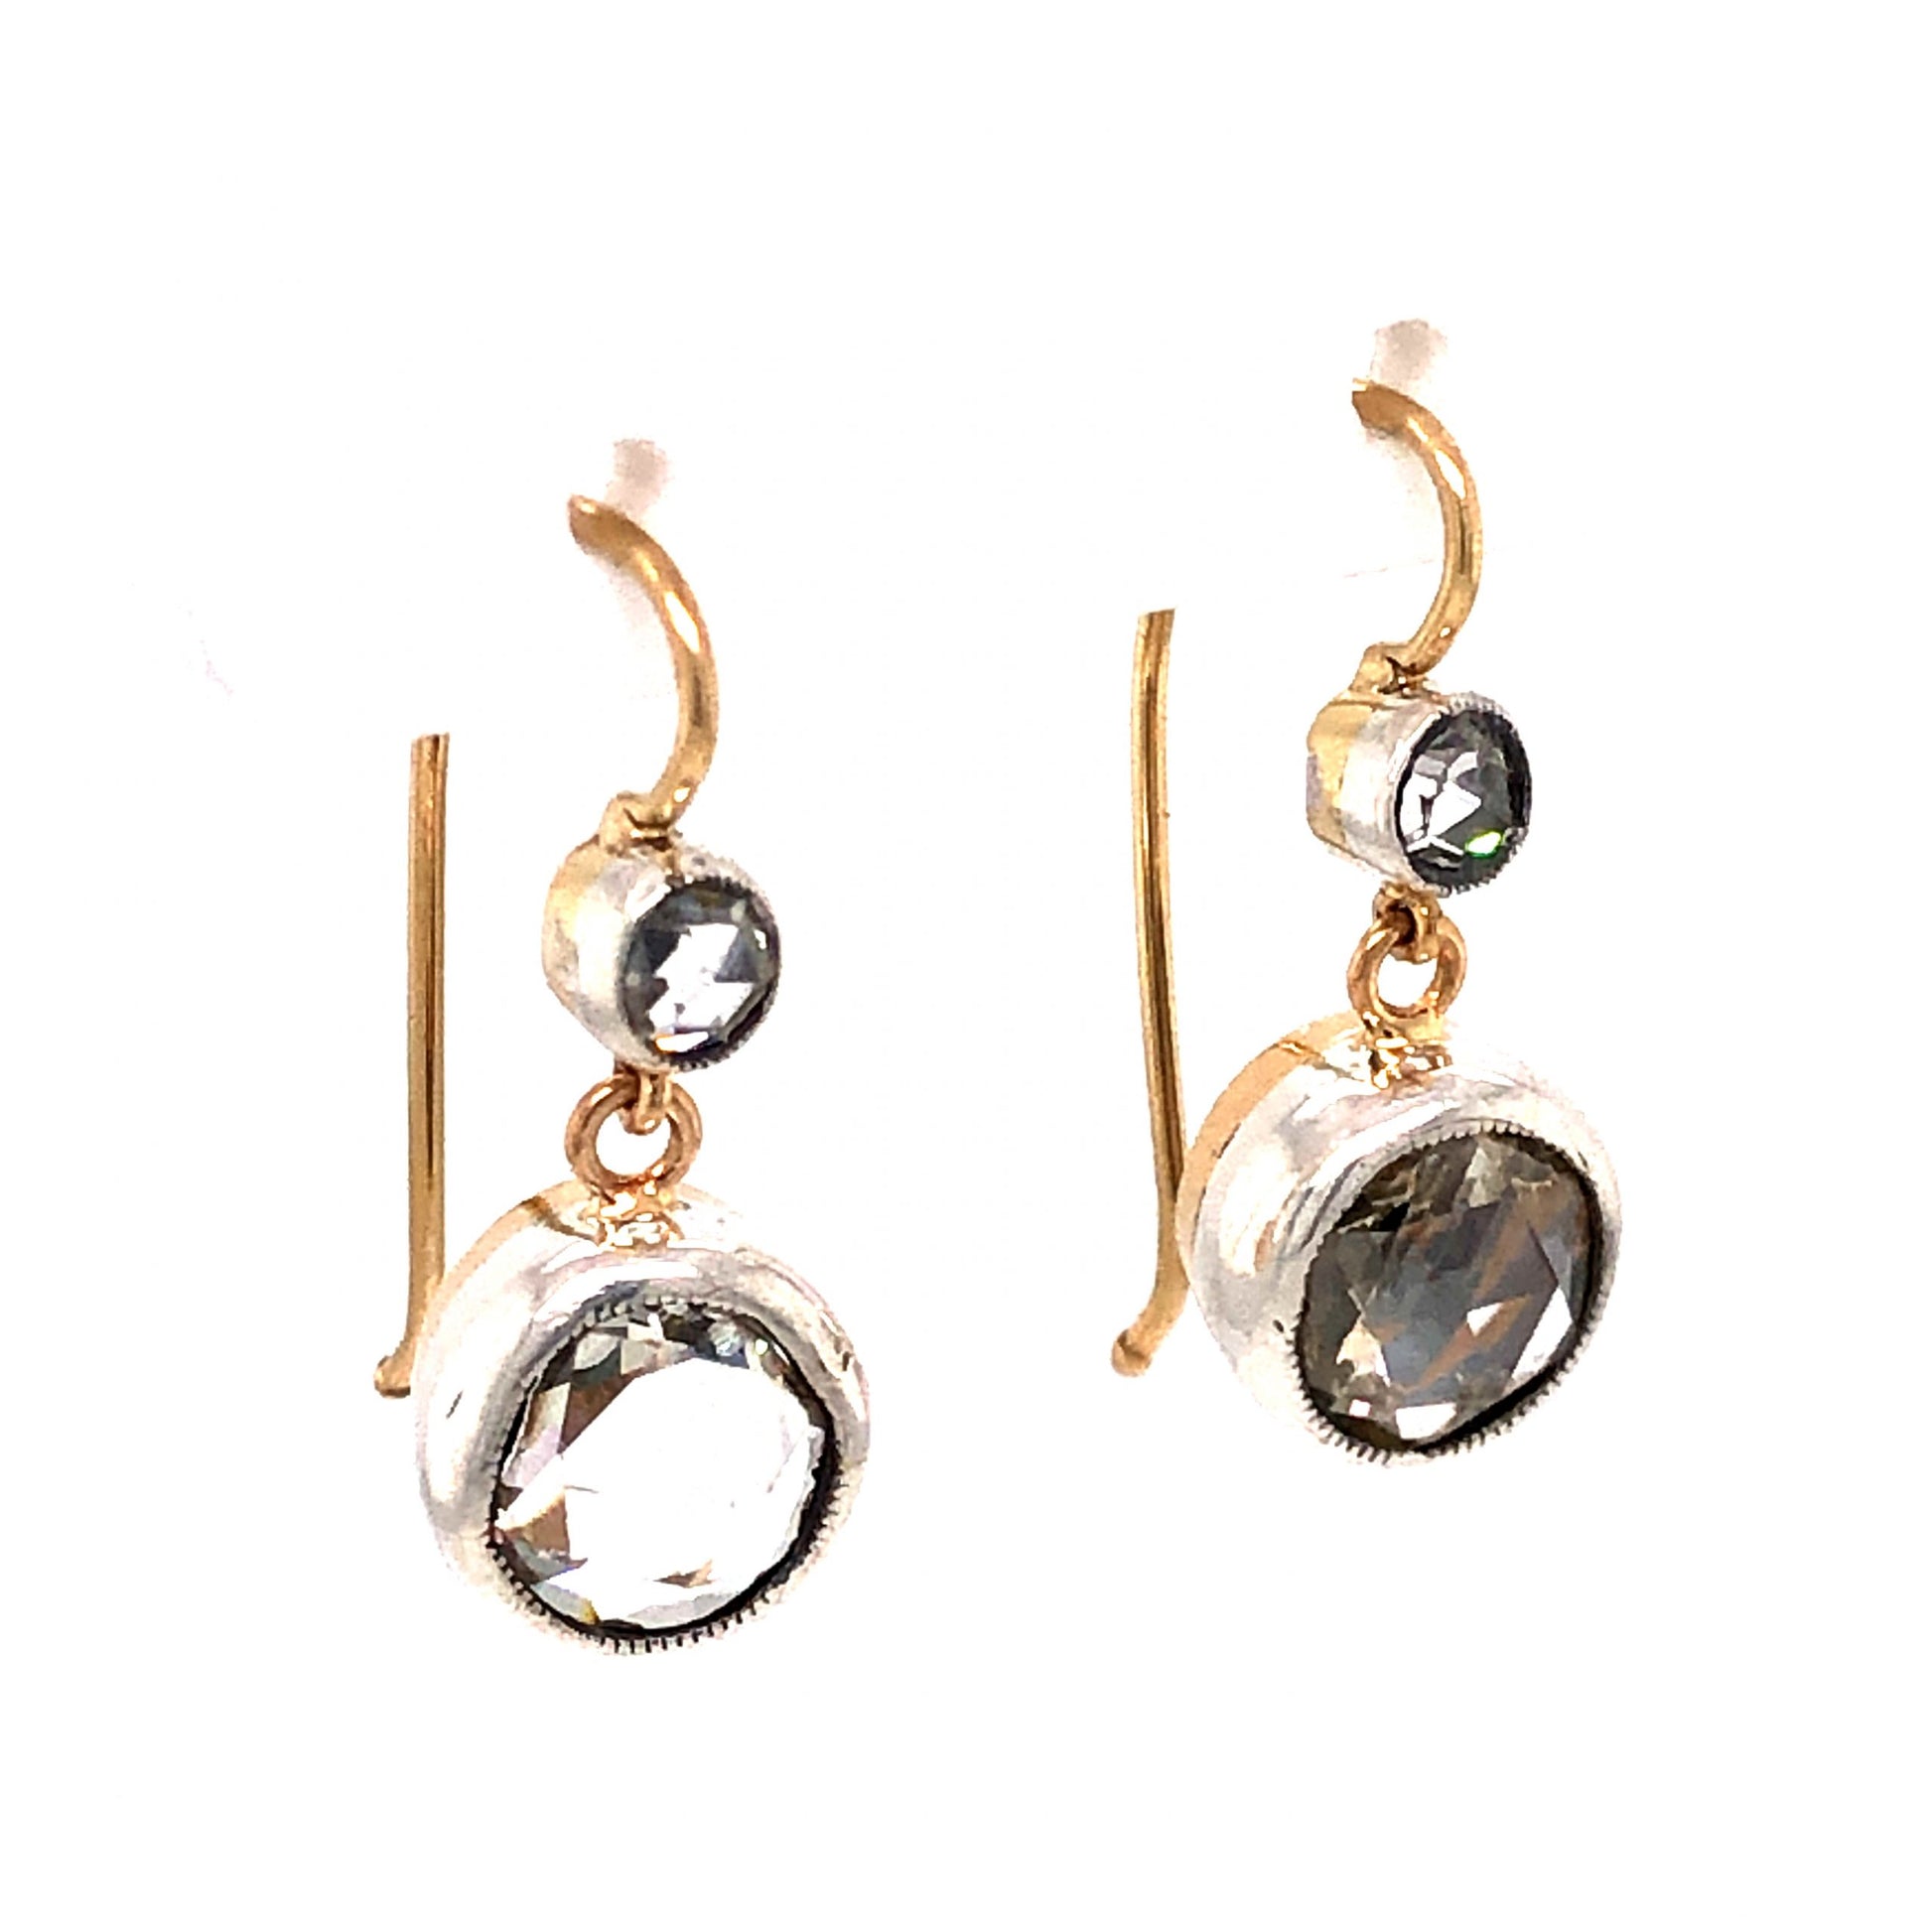 3.04 Victorian Rose Cut Diamond Earrings in 14k Gold and Silver